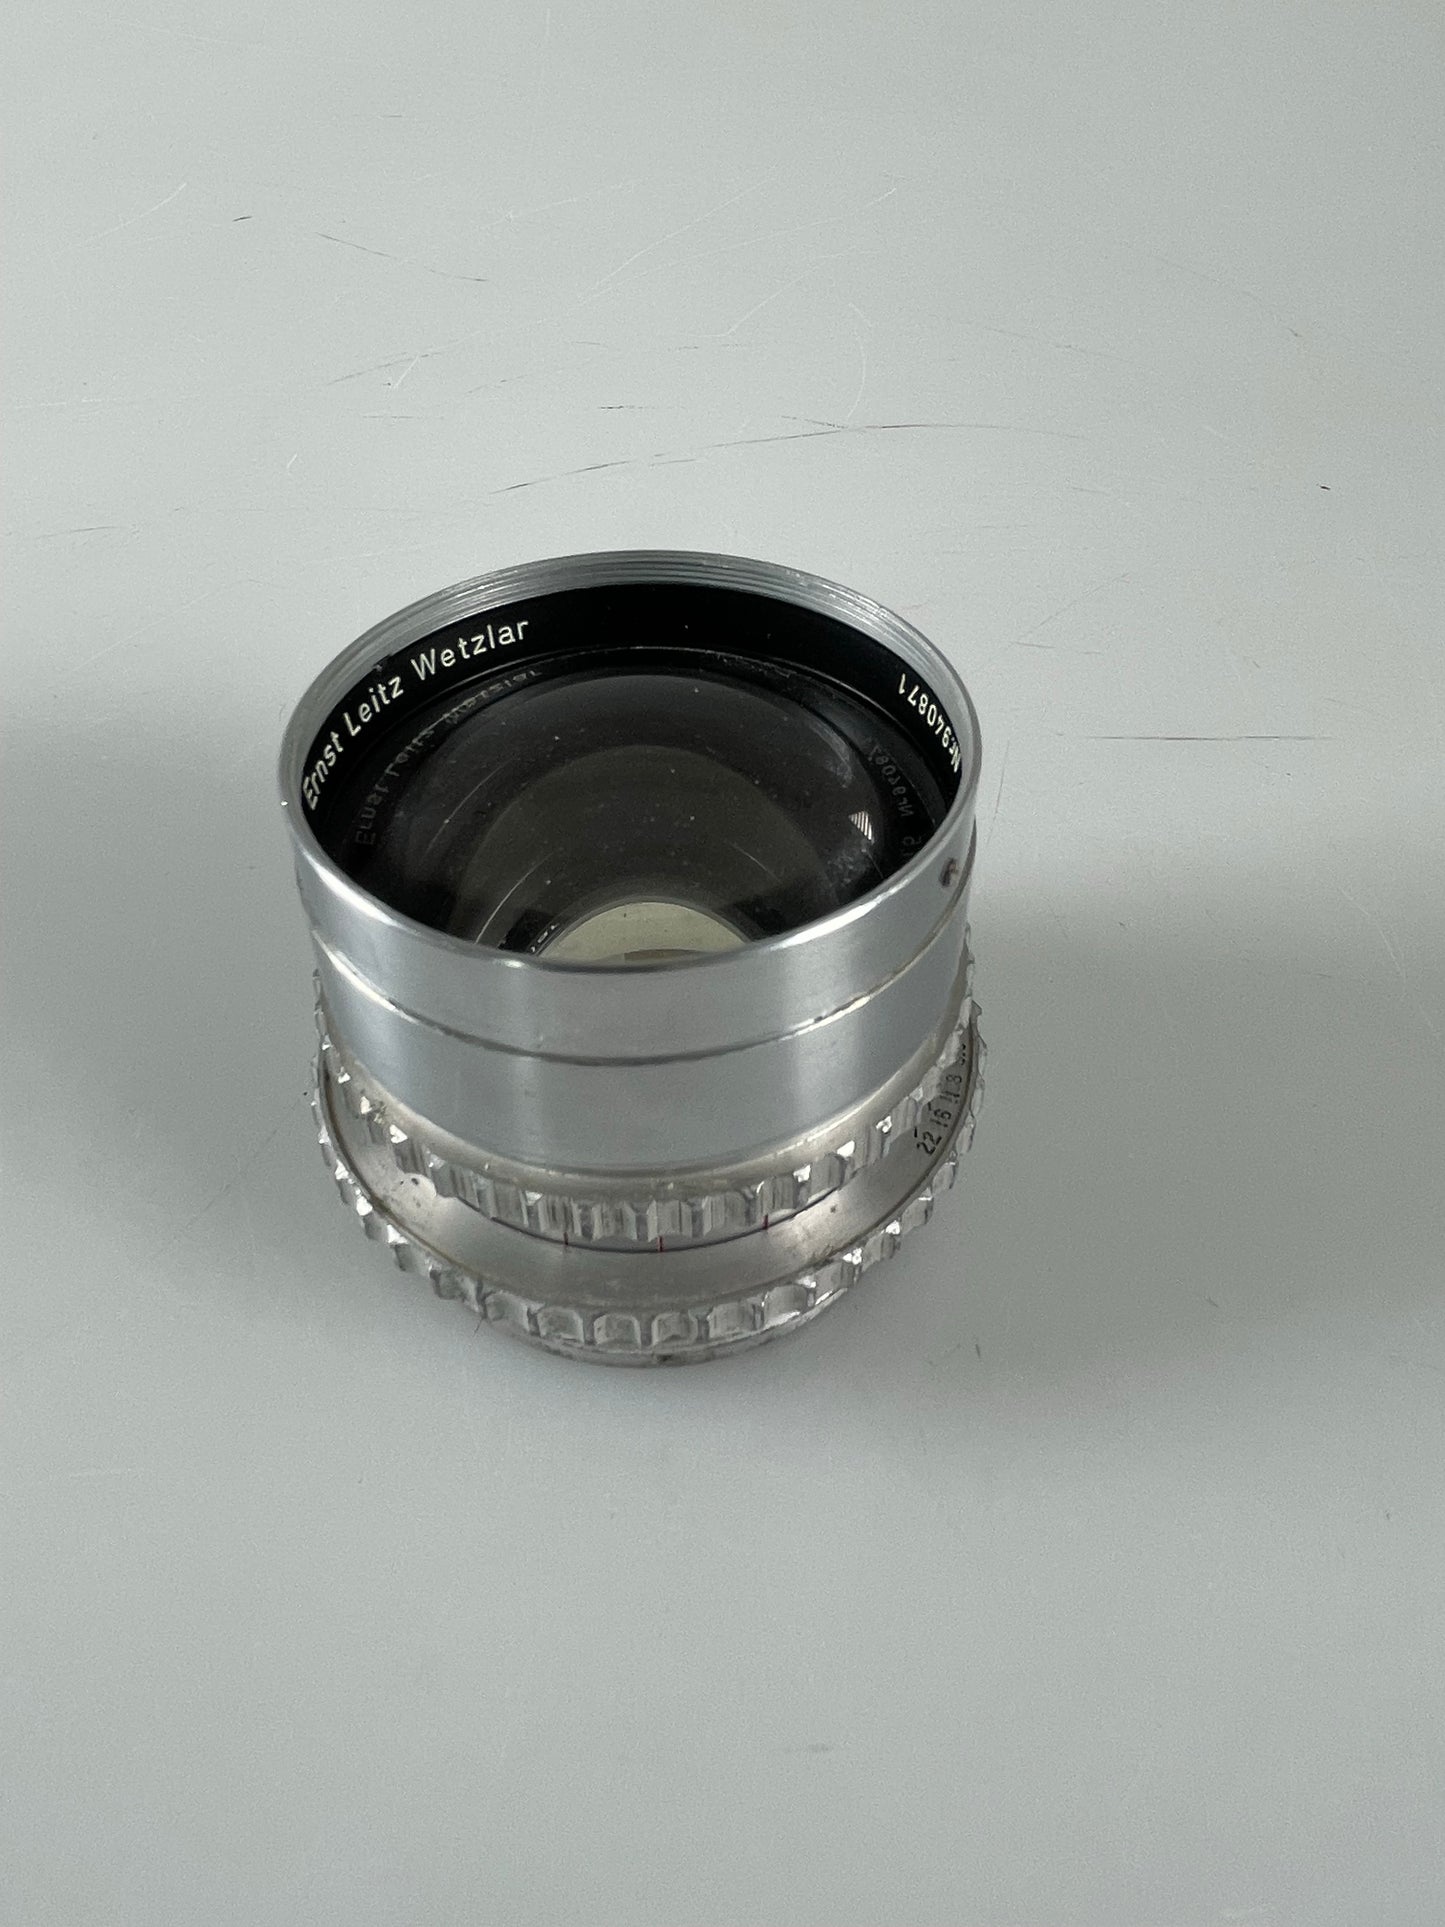 Leica Summarex 8.5cm F1.5 Front element on a Helical